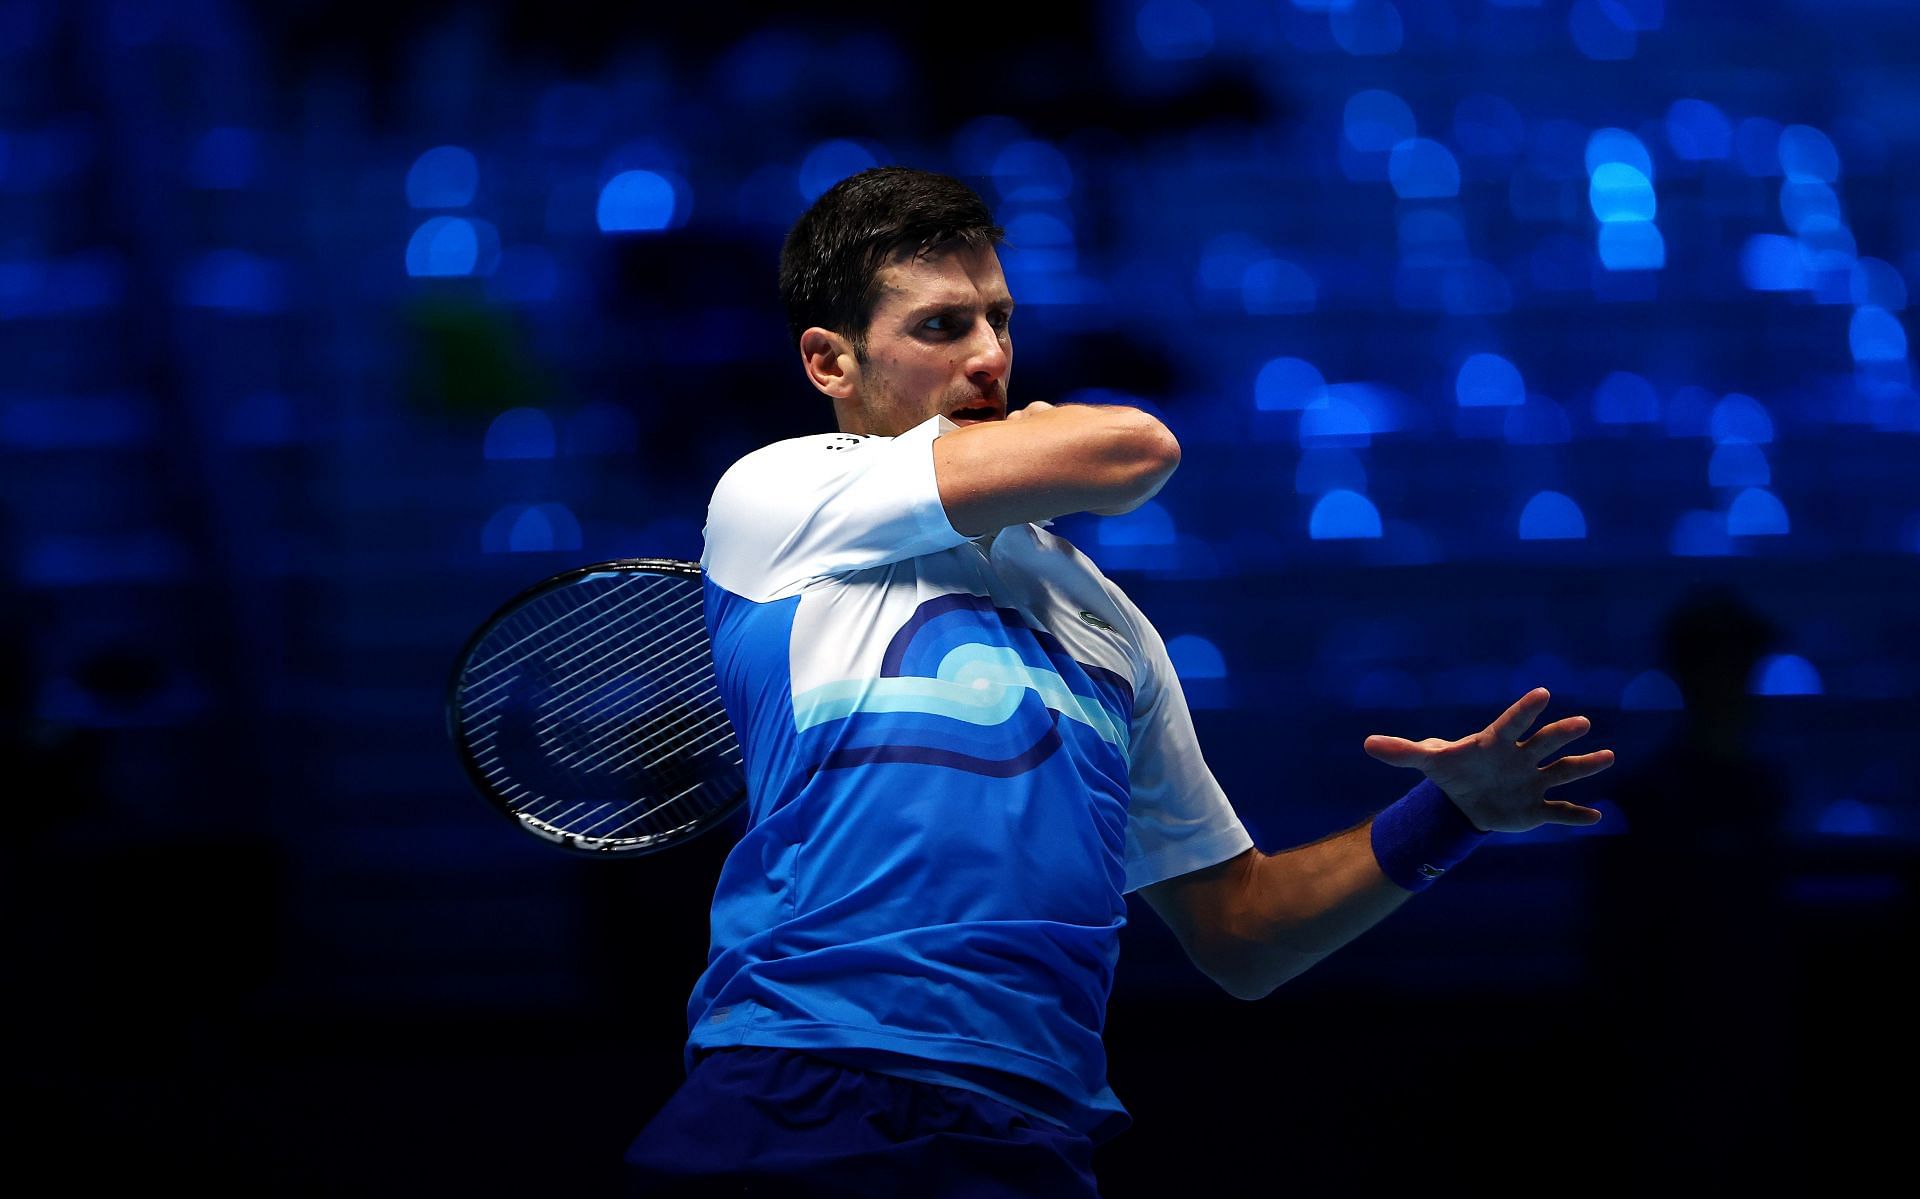 Nitto ATP World Tour Finals - Day Six